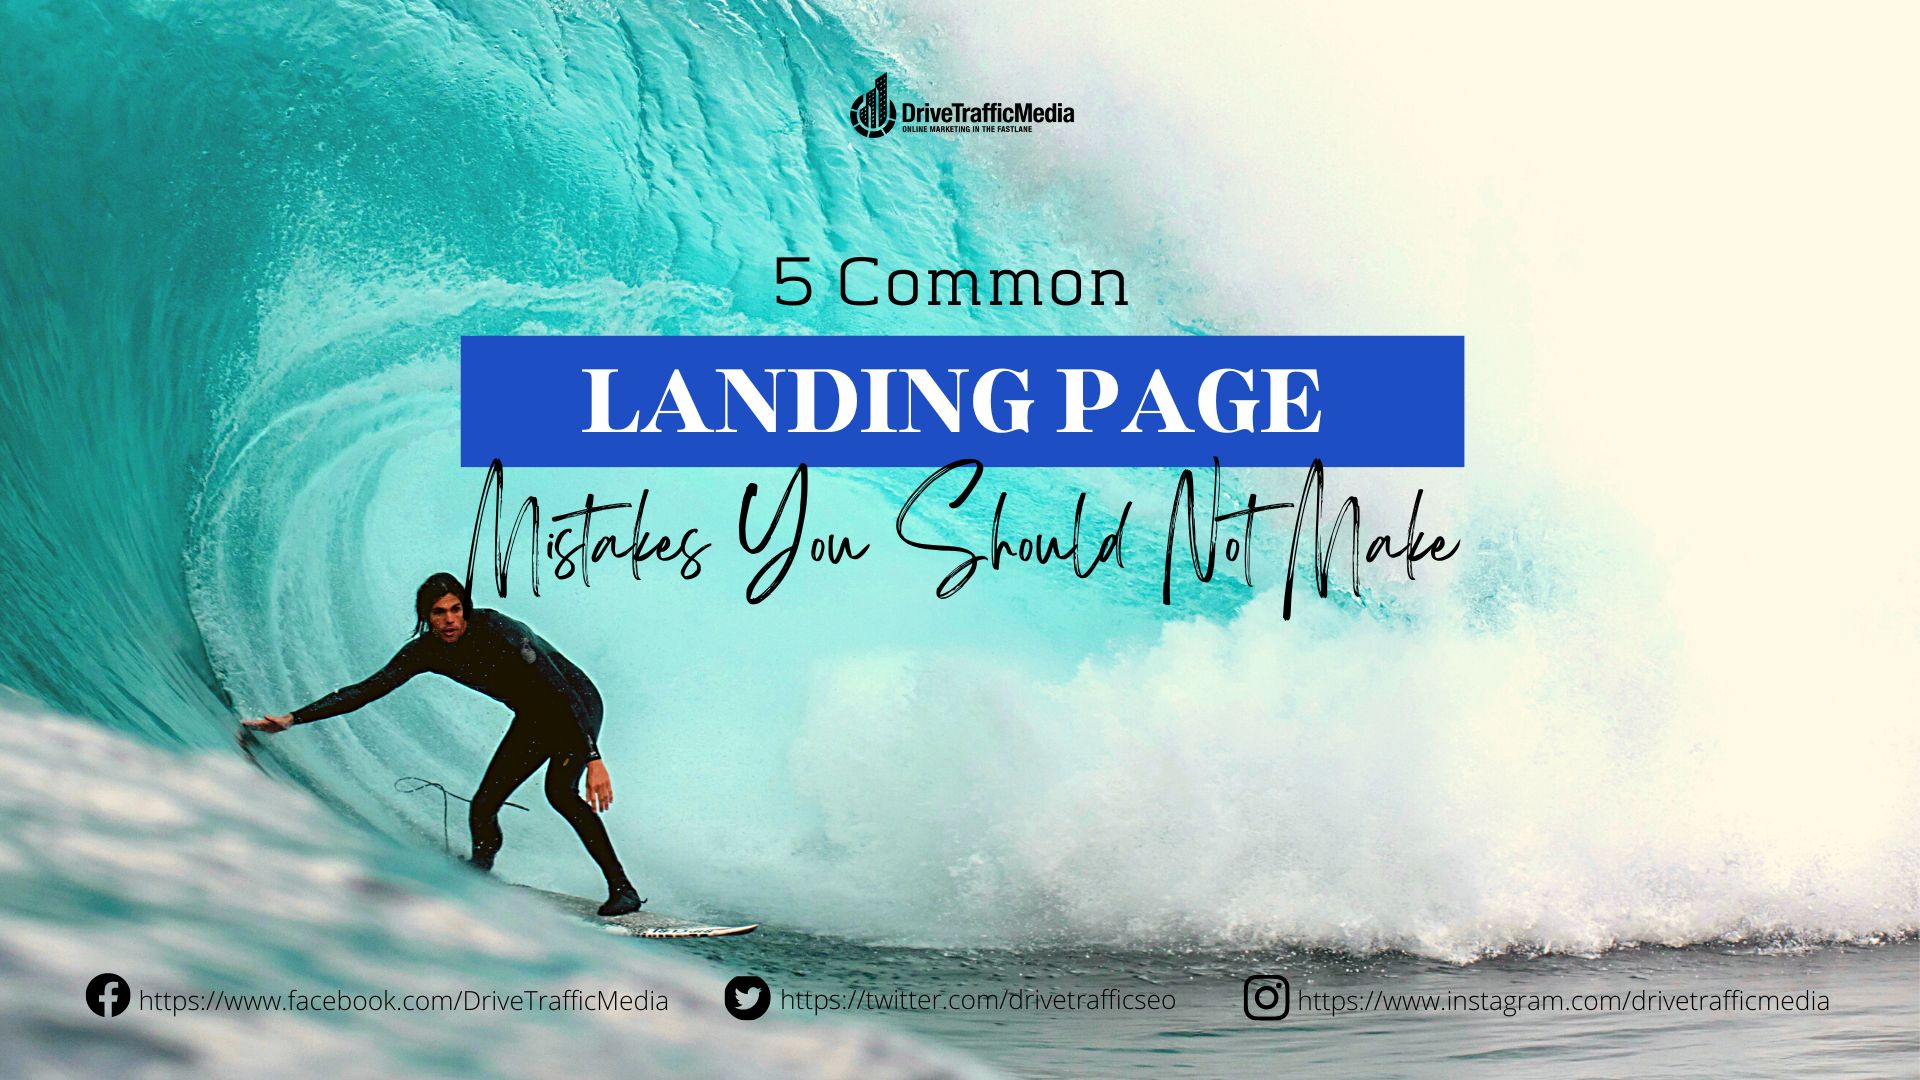 web-design-company-in-anaheim-tells-us-of-the-common-mistakes-to-avoid-when-designing-a-landing-page